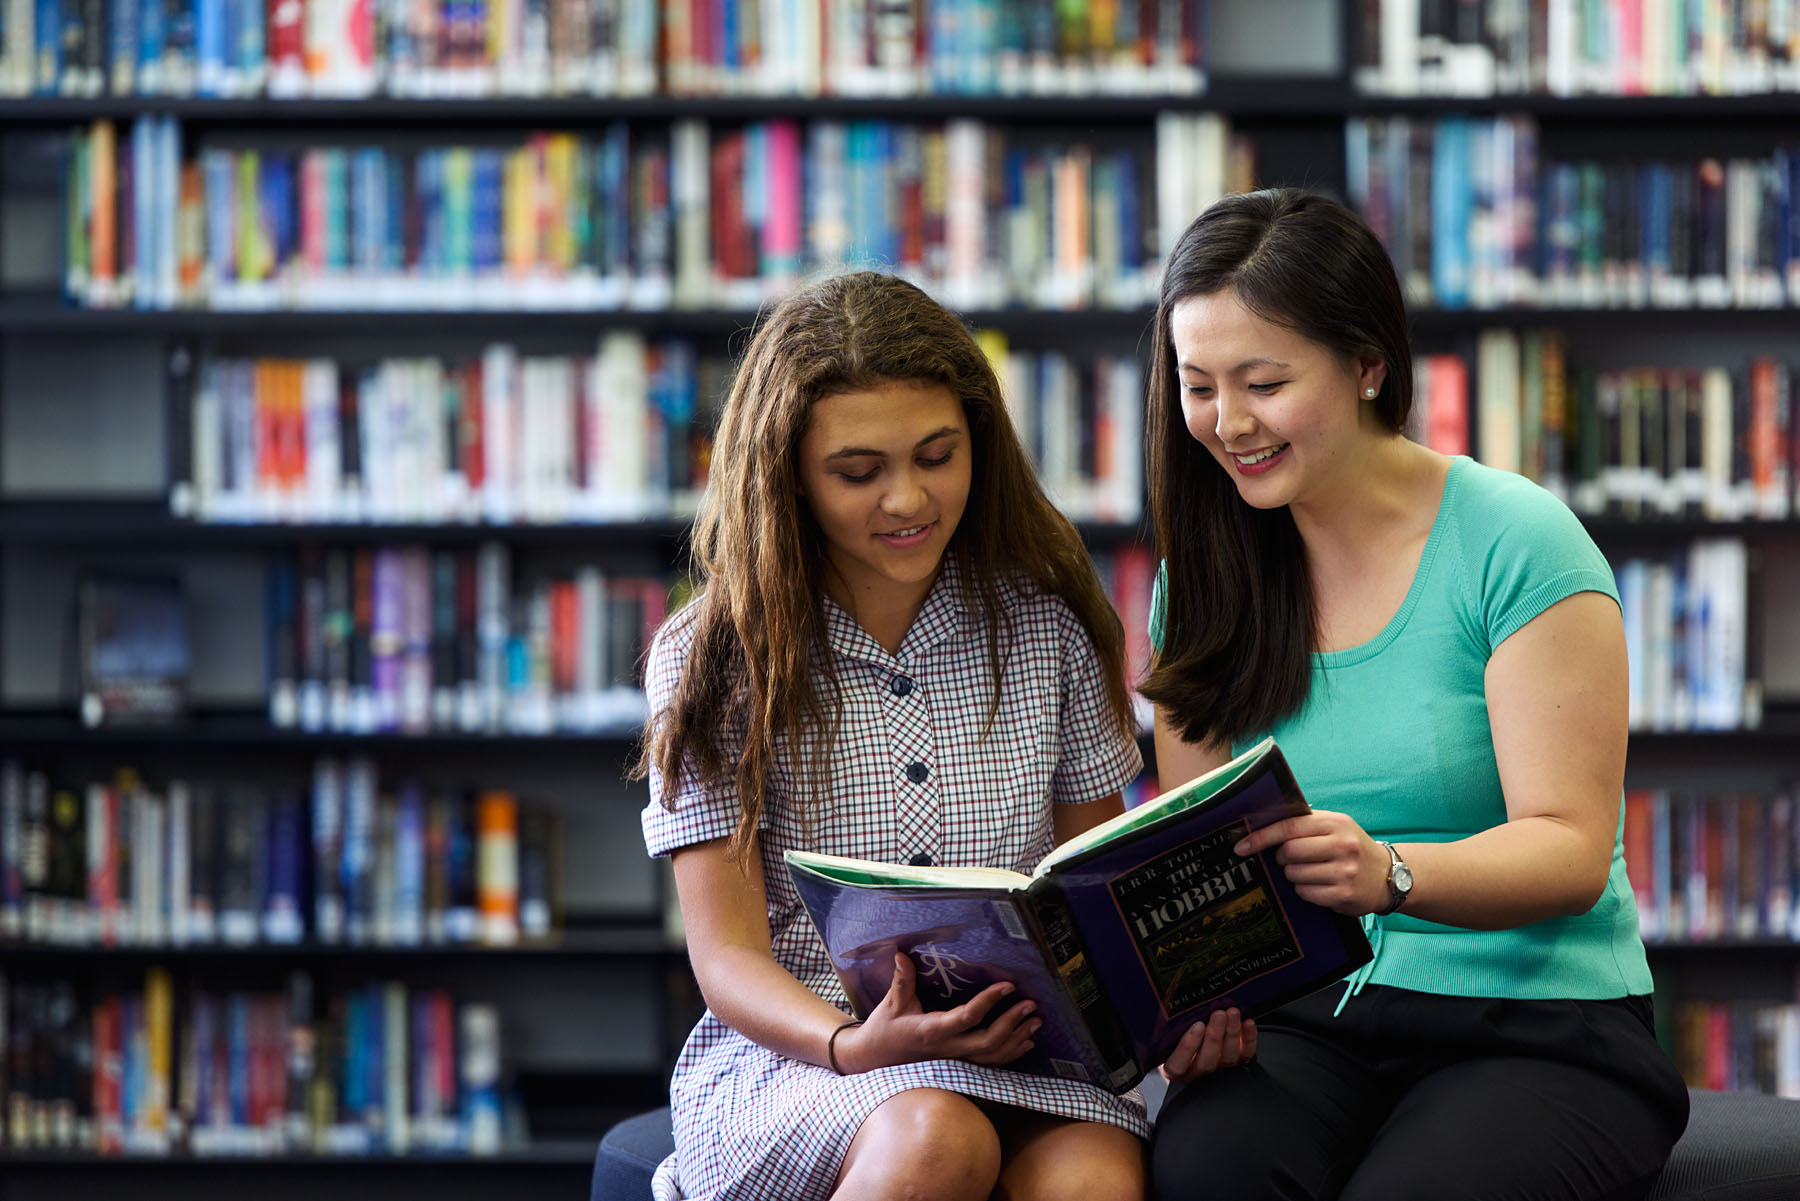 Teacher and Student reading together in a library